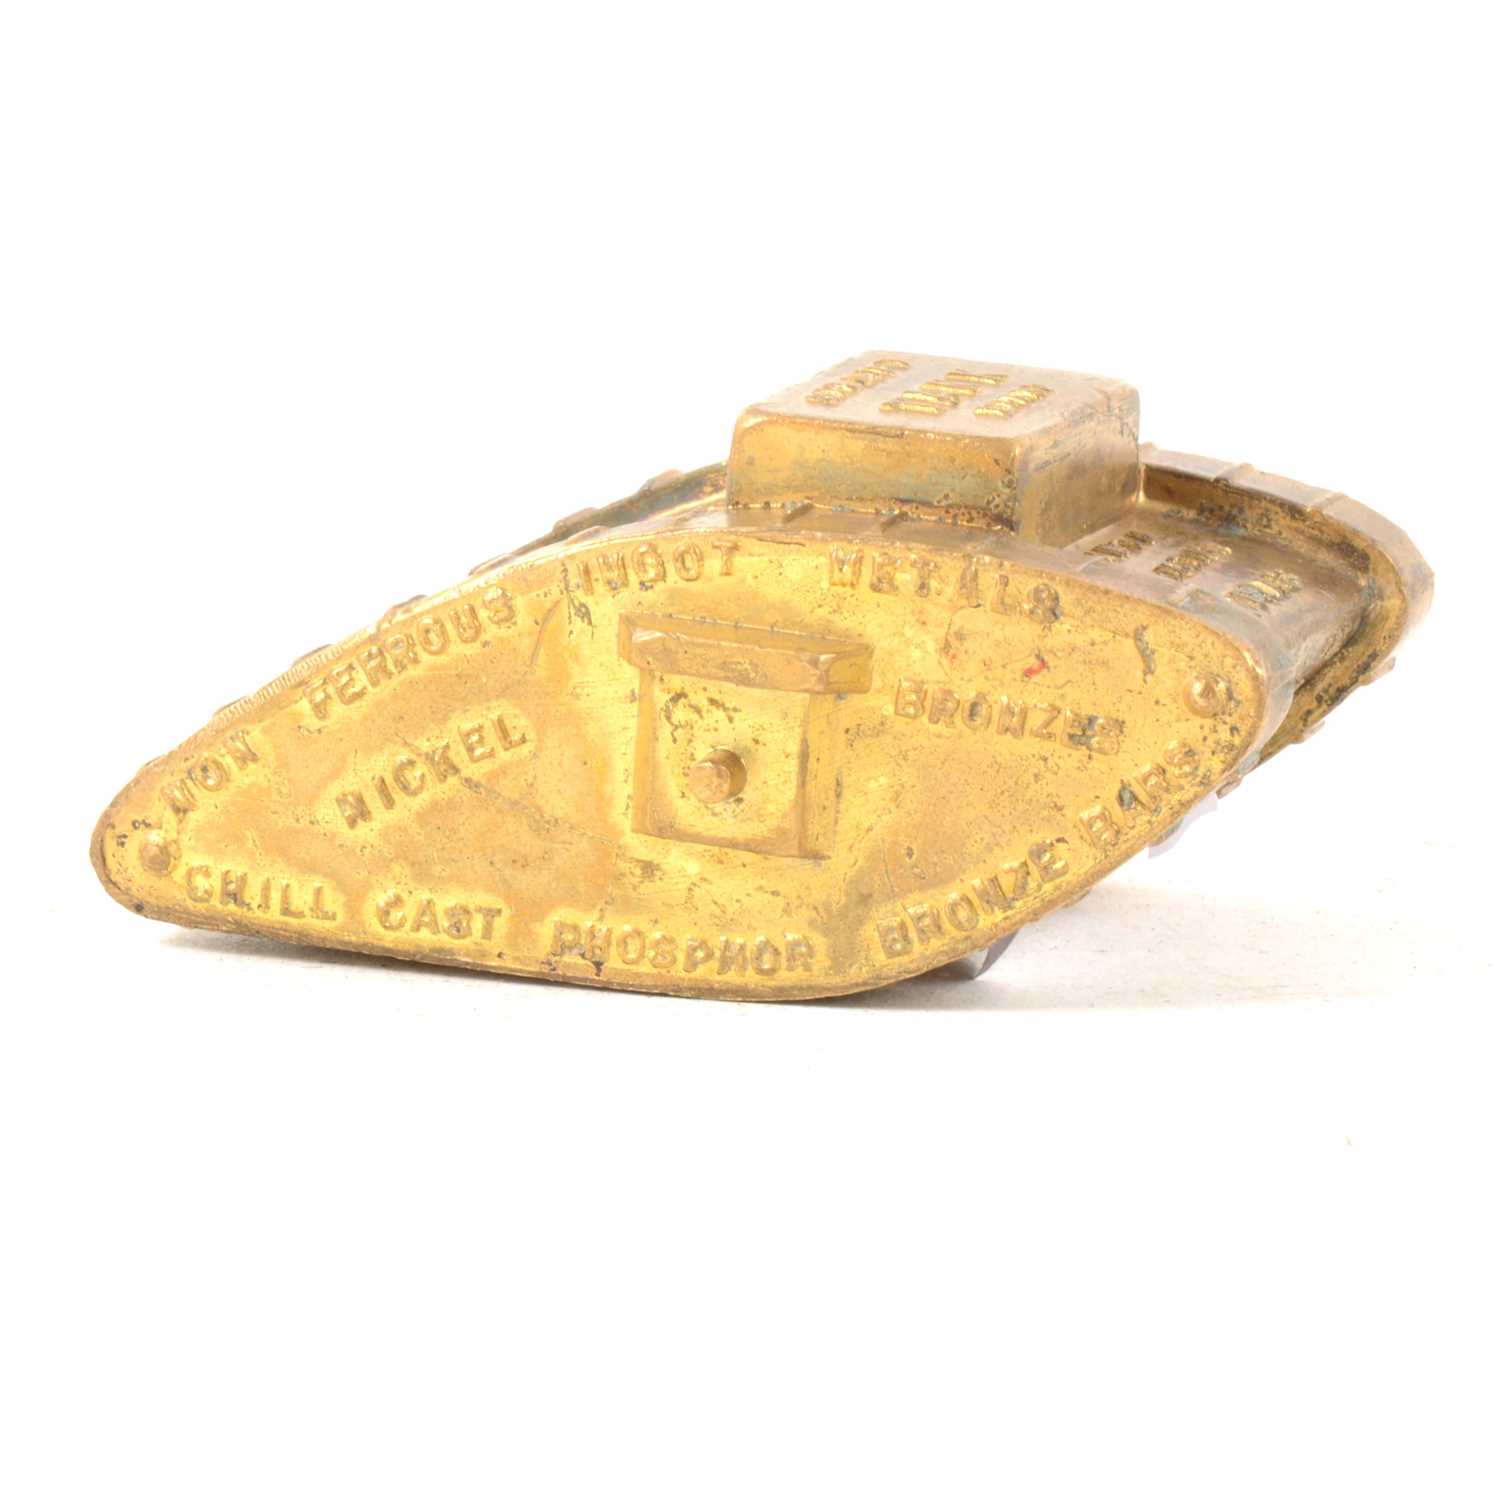 Lot 148 - A WWI bronze novelty advertising paperweight modelled as a military tank.